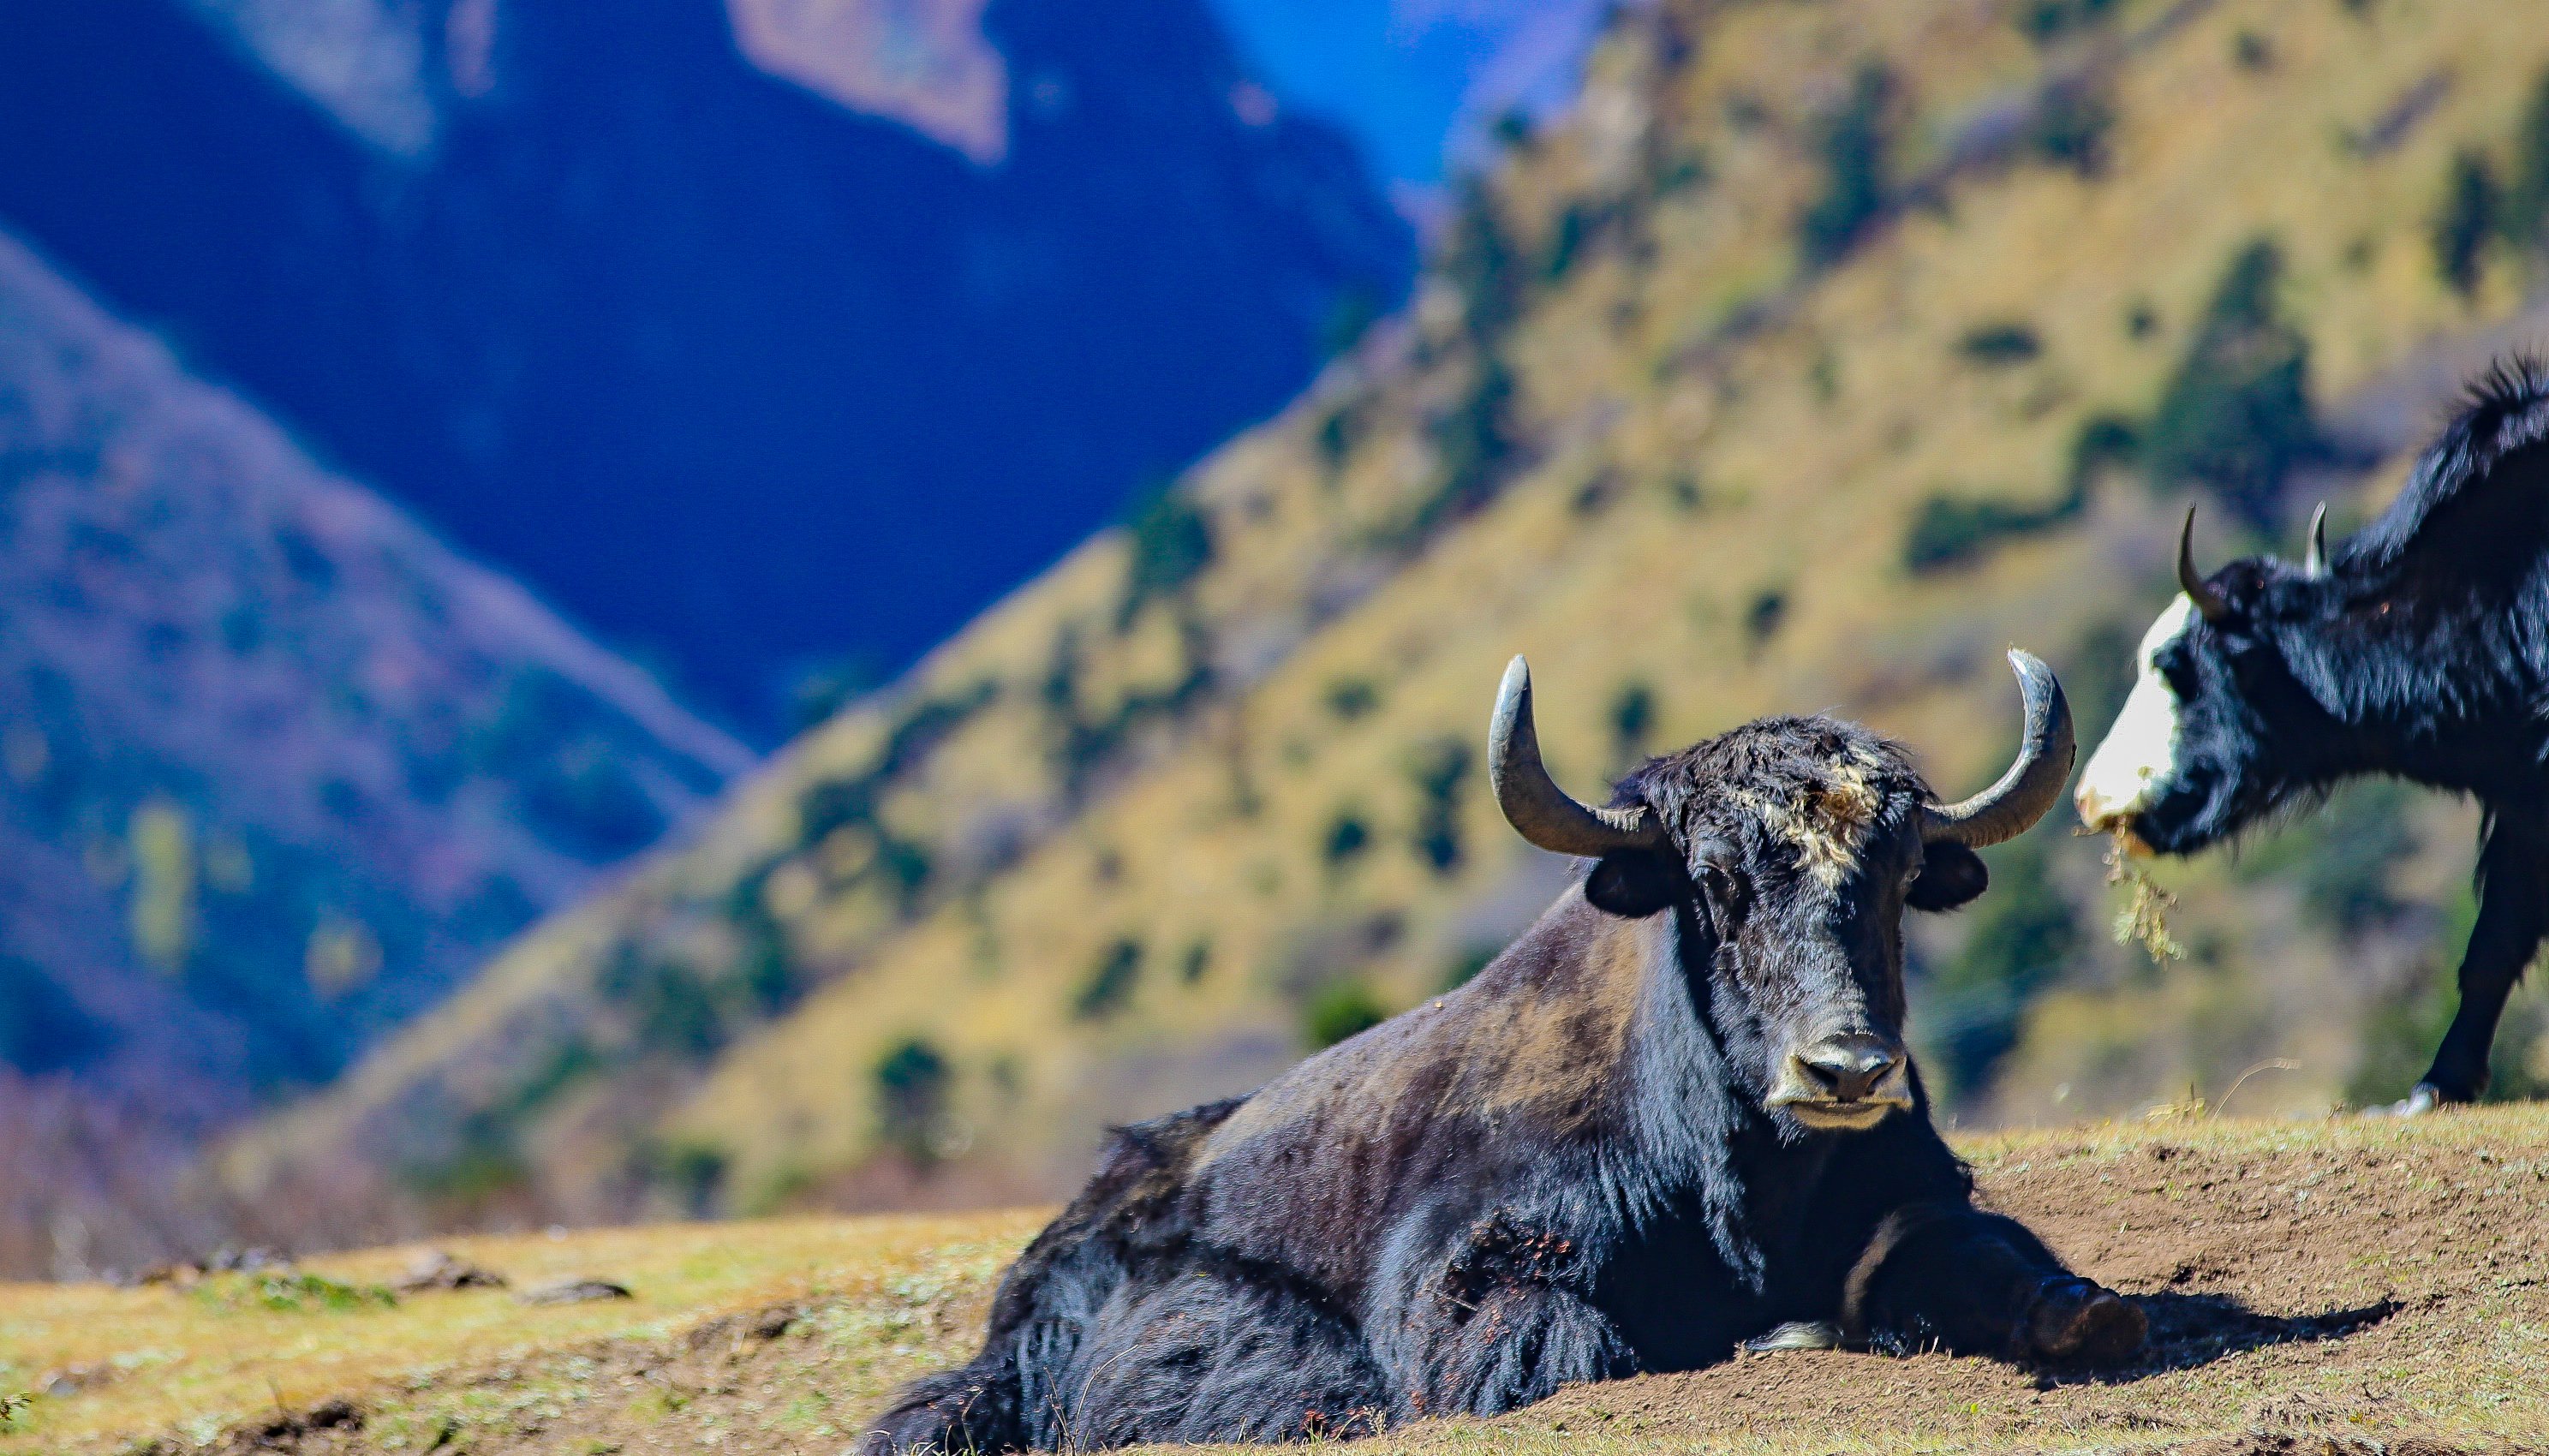 Read Shielding yaks to protect snow leopards and highland livelihood&nbsp; &nbsp; &nbsp; &nbsp; &nbsp; &nbsp;&nbsp; by UNDP Bhutan